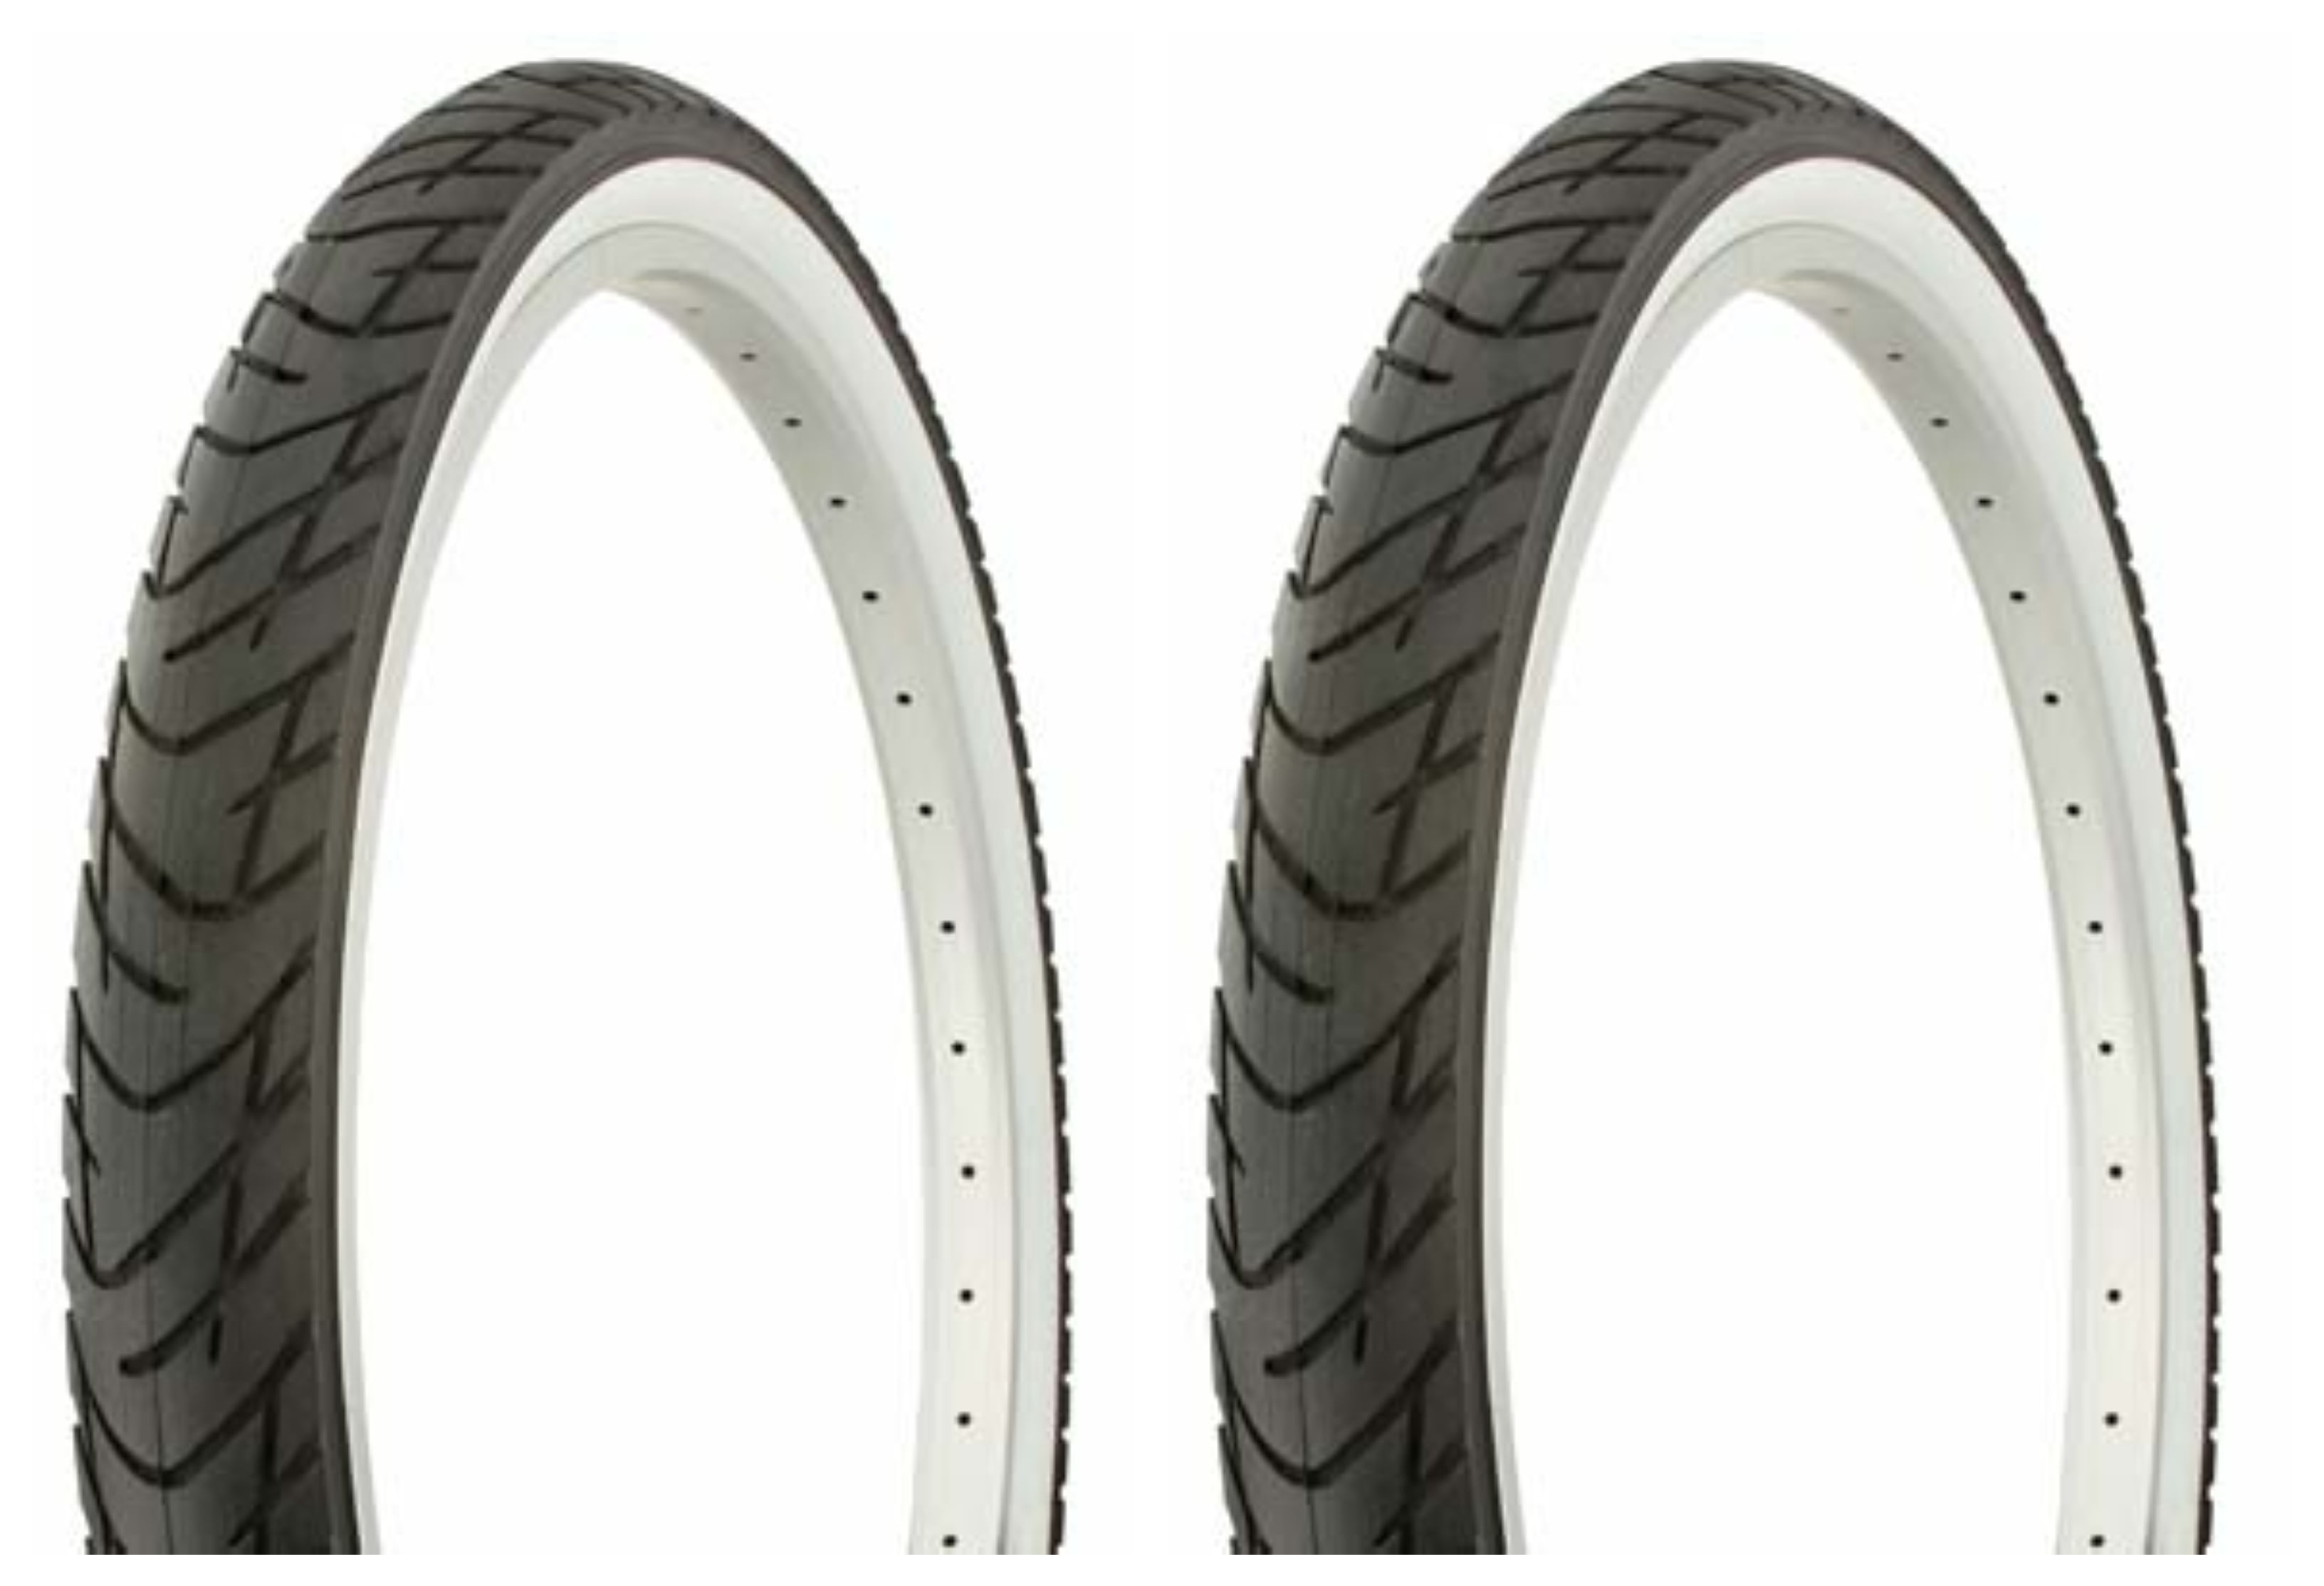 BICYCLE DURO TIRE IN 14 X 2.125 BLACK/BLACK SIDE WALL IN COMP III STYLE! NEW 